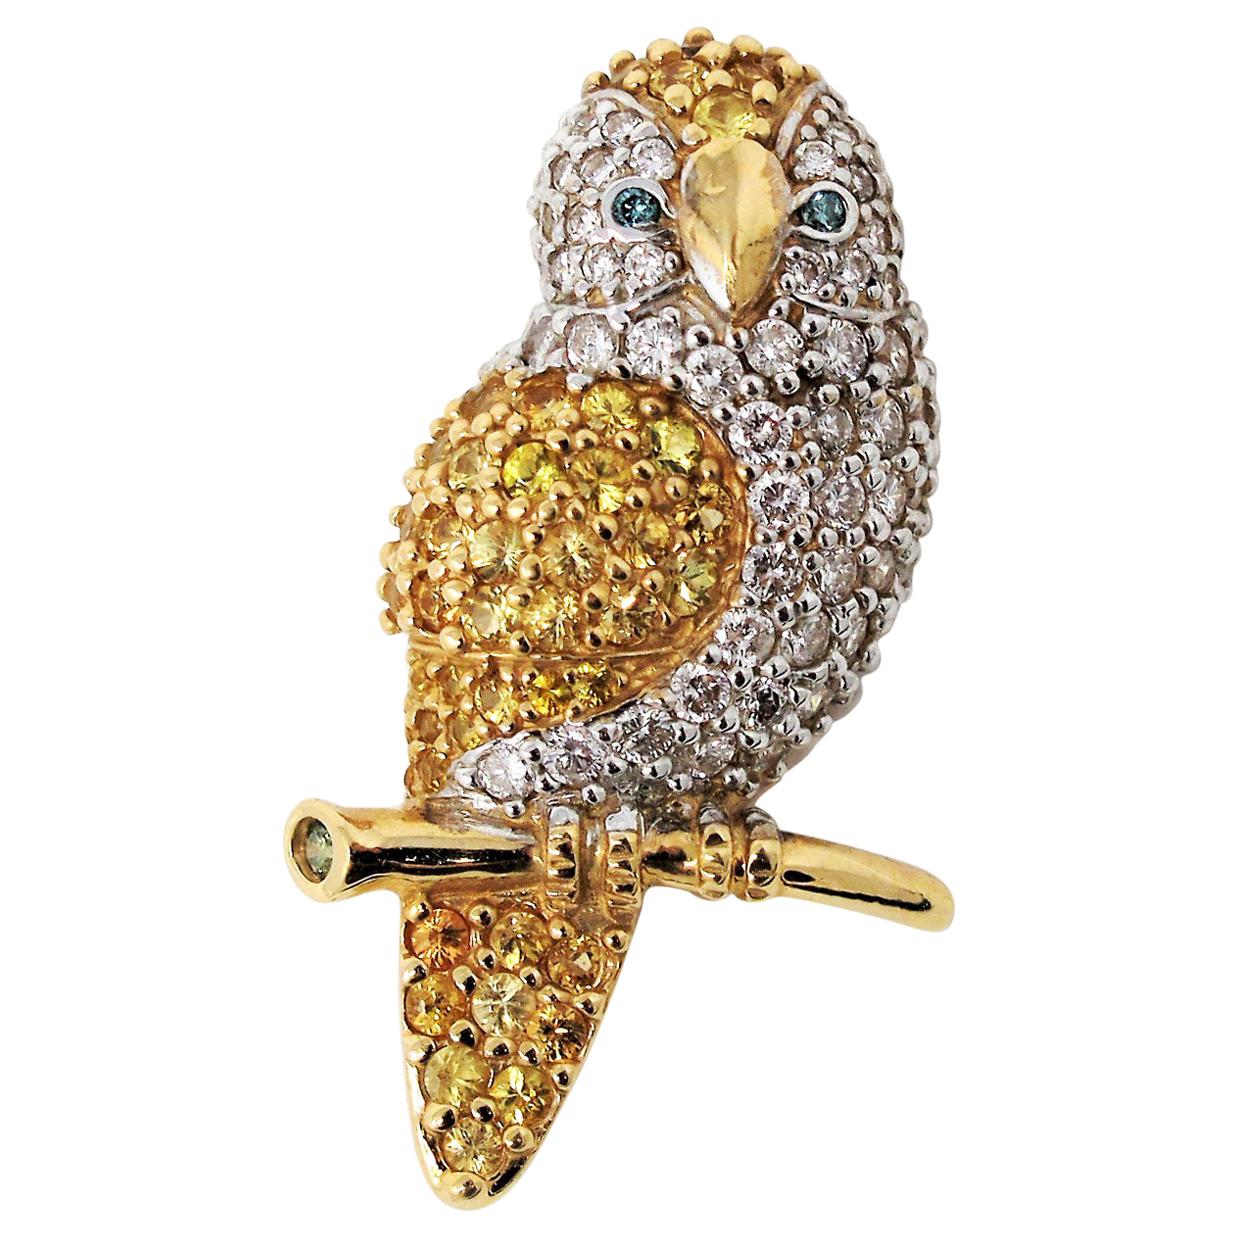 Unique Owl Brooch with Diamonds and Yellow Sapphires 14 Karat Gold 3.30 Carats